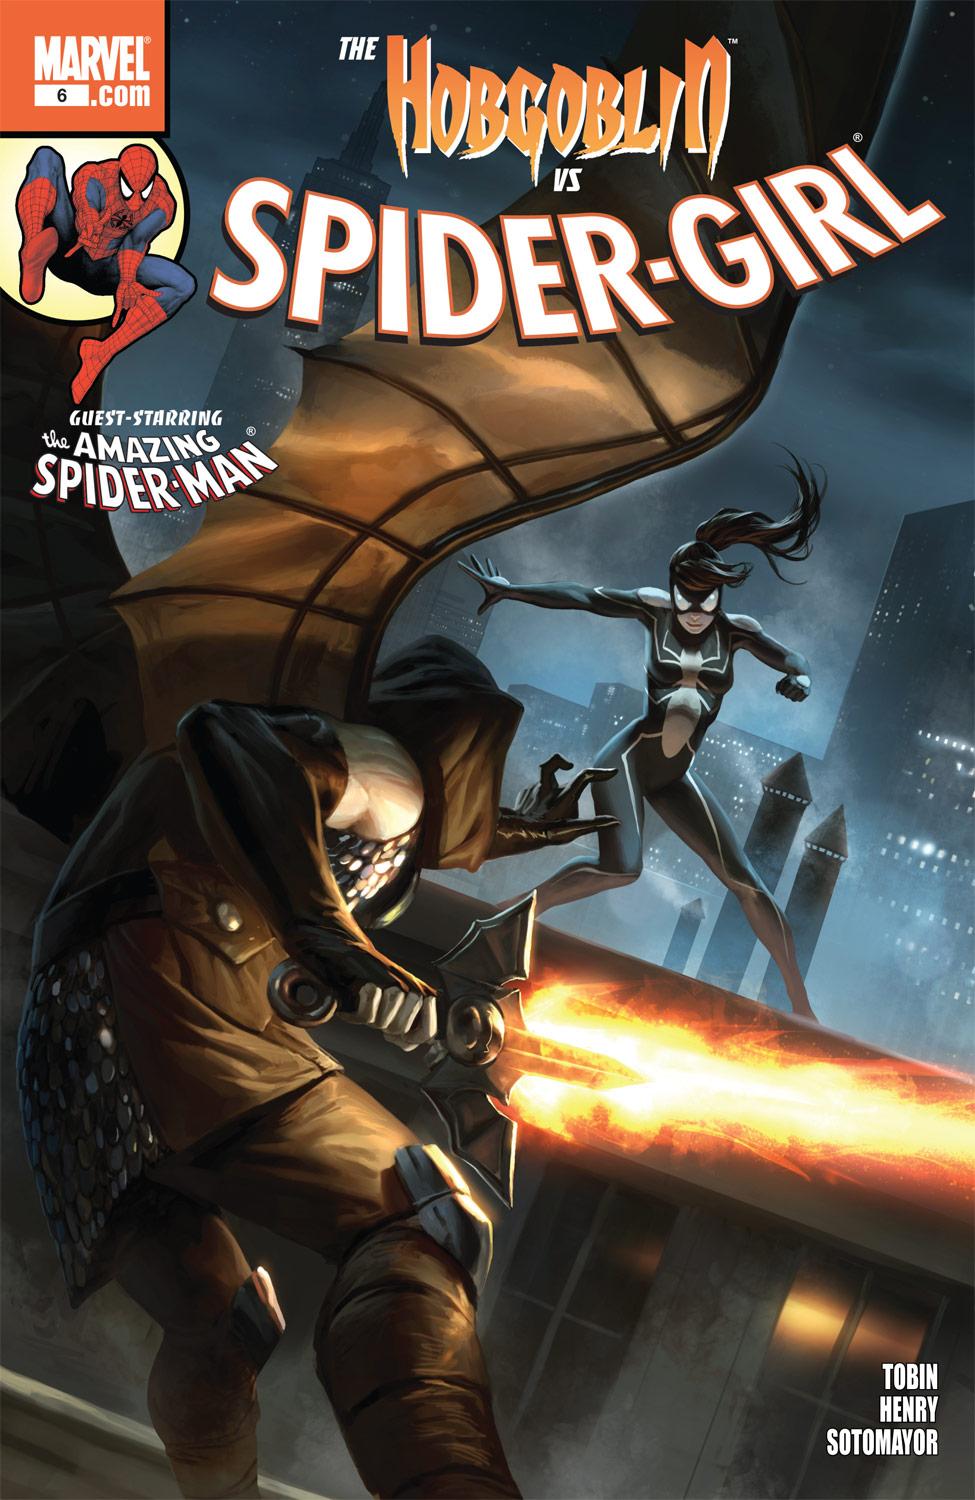 SPIDER-GIRL #6 - The Comic Construct